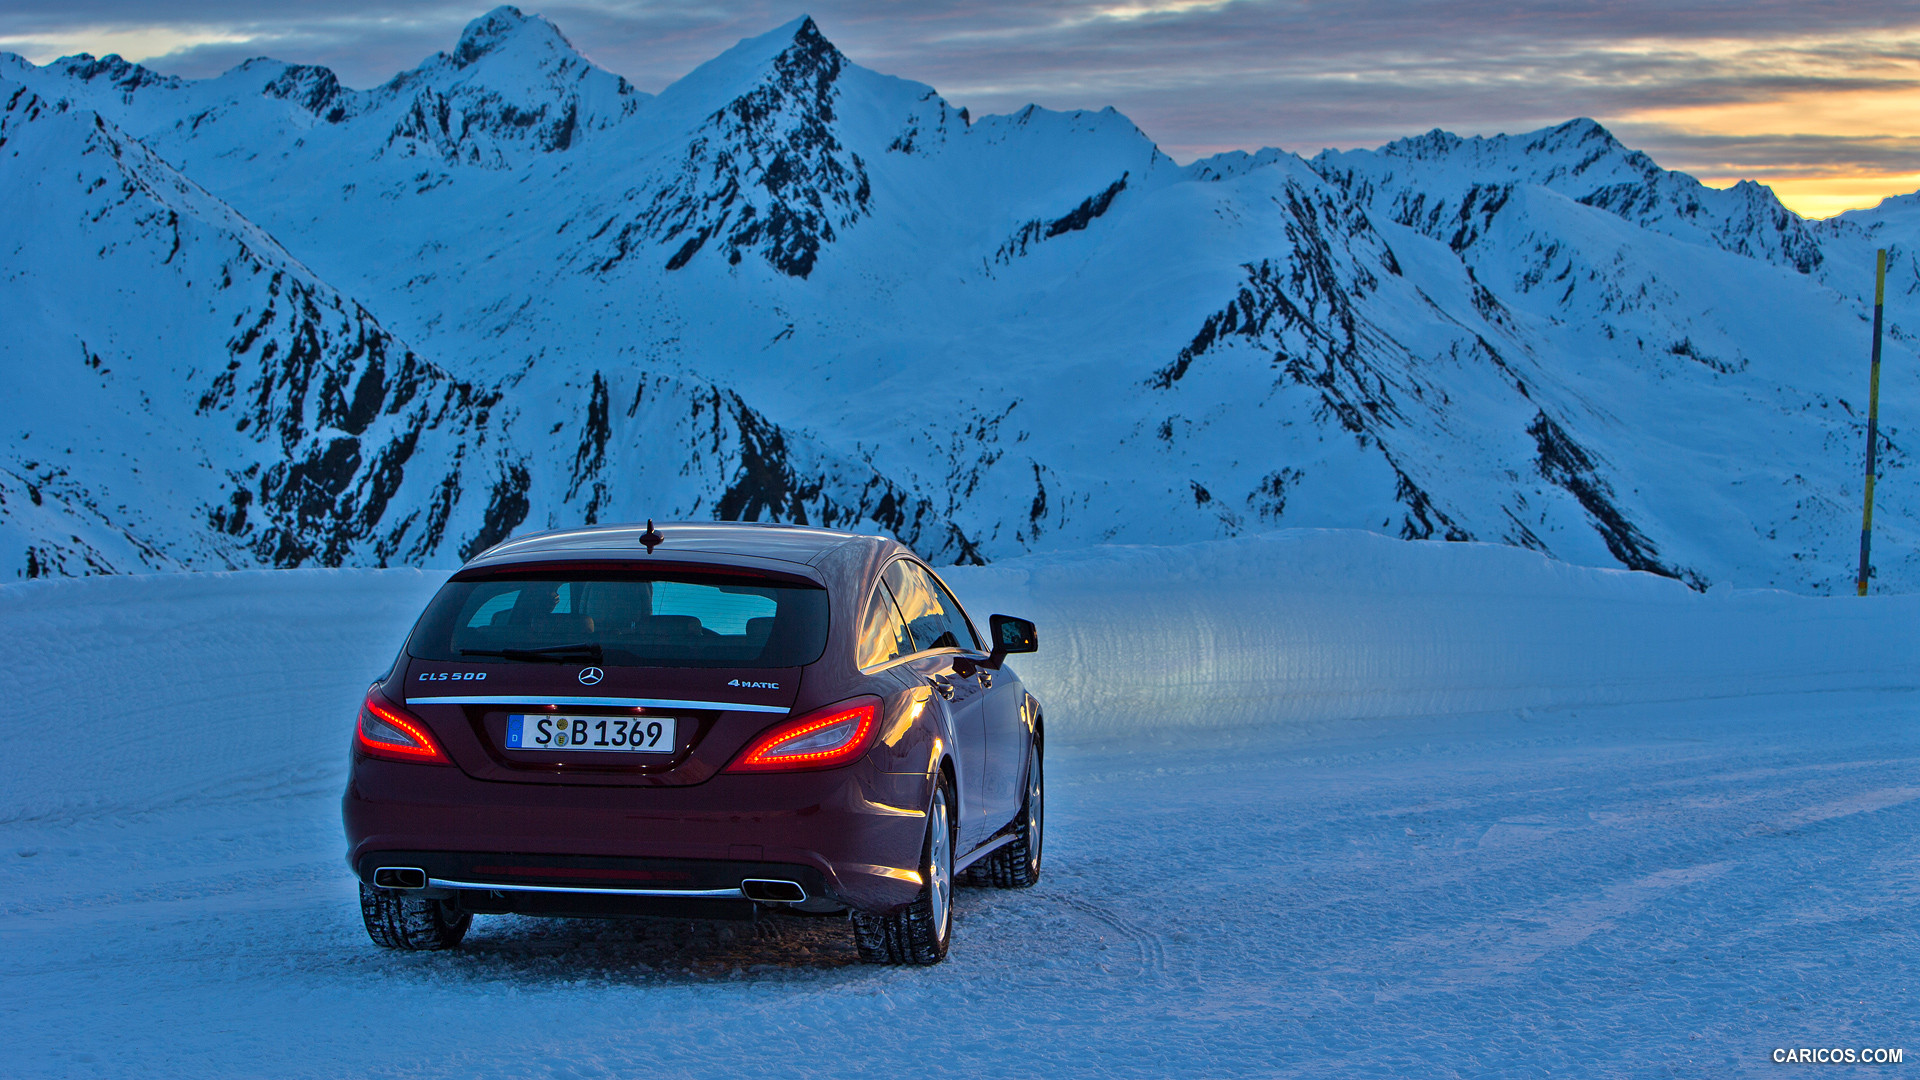 2013 Mercedes-Benz CLS 500 4MATIC Shooting Brake on Snow - Rear, #160 of 184